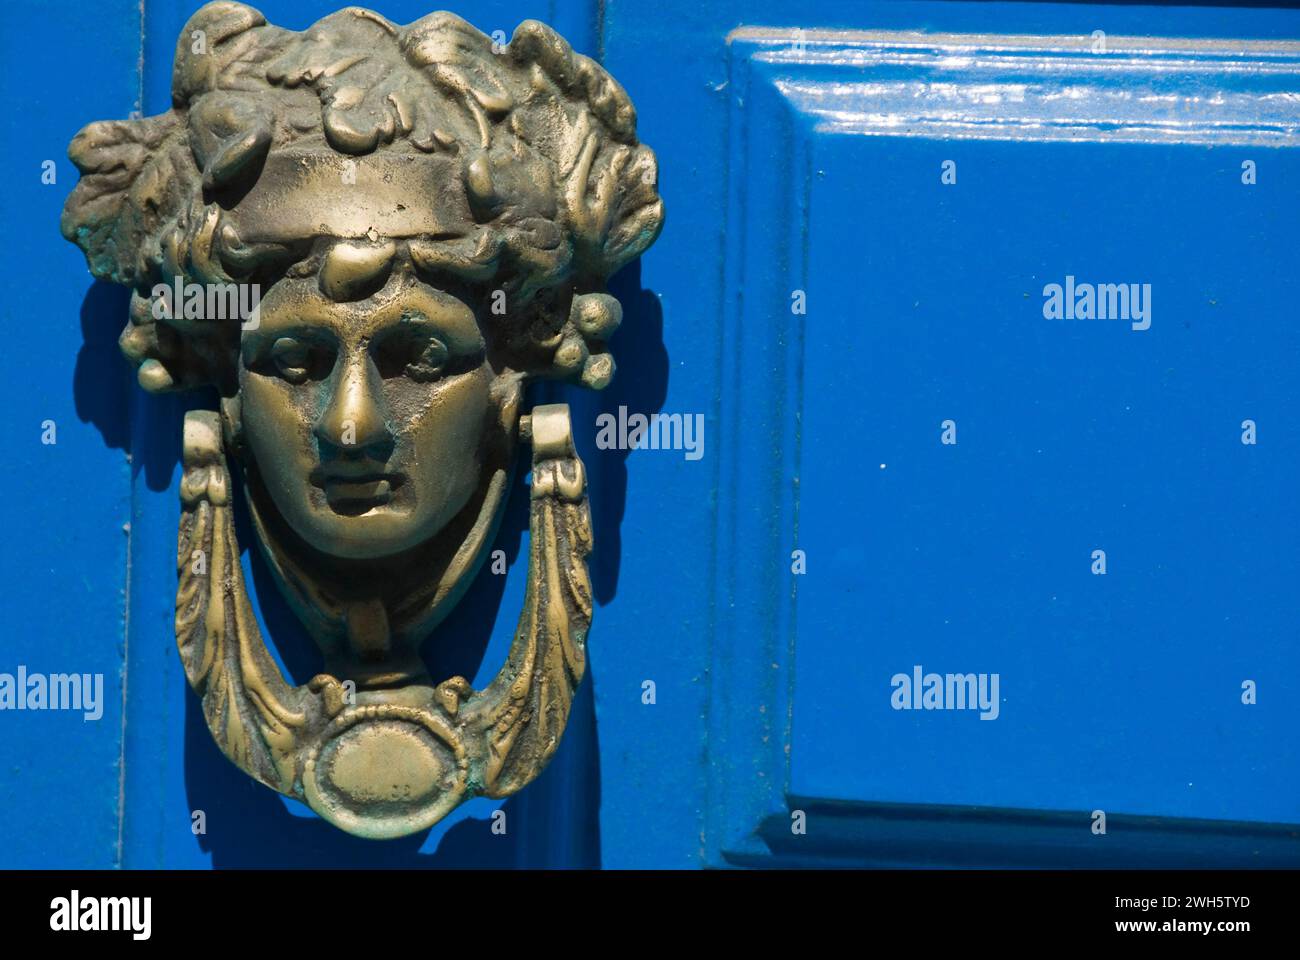 A small statue next to a blue door. Stock Photo